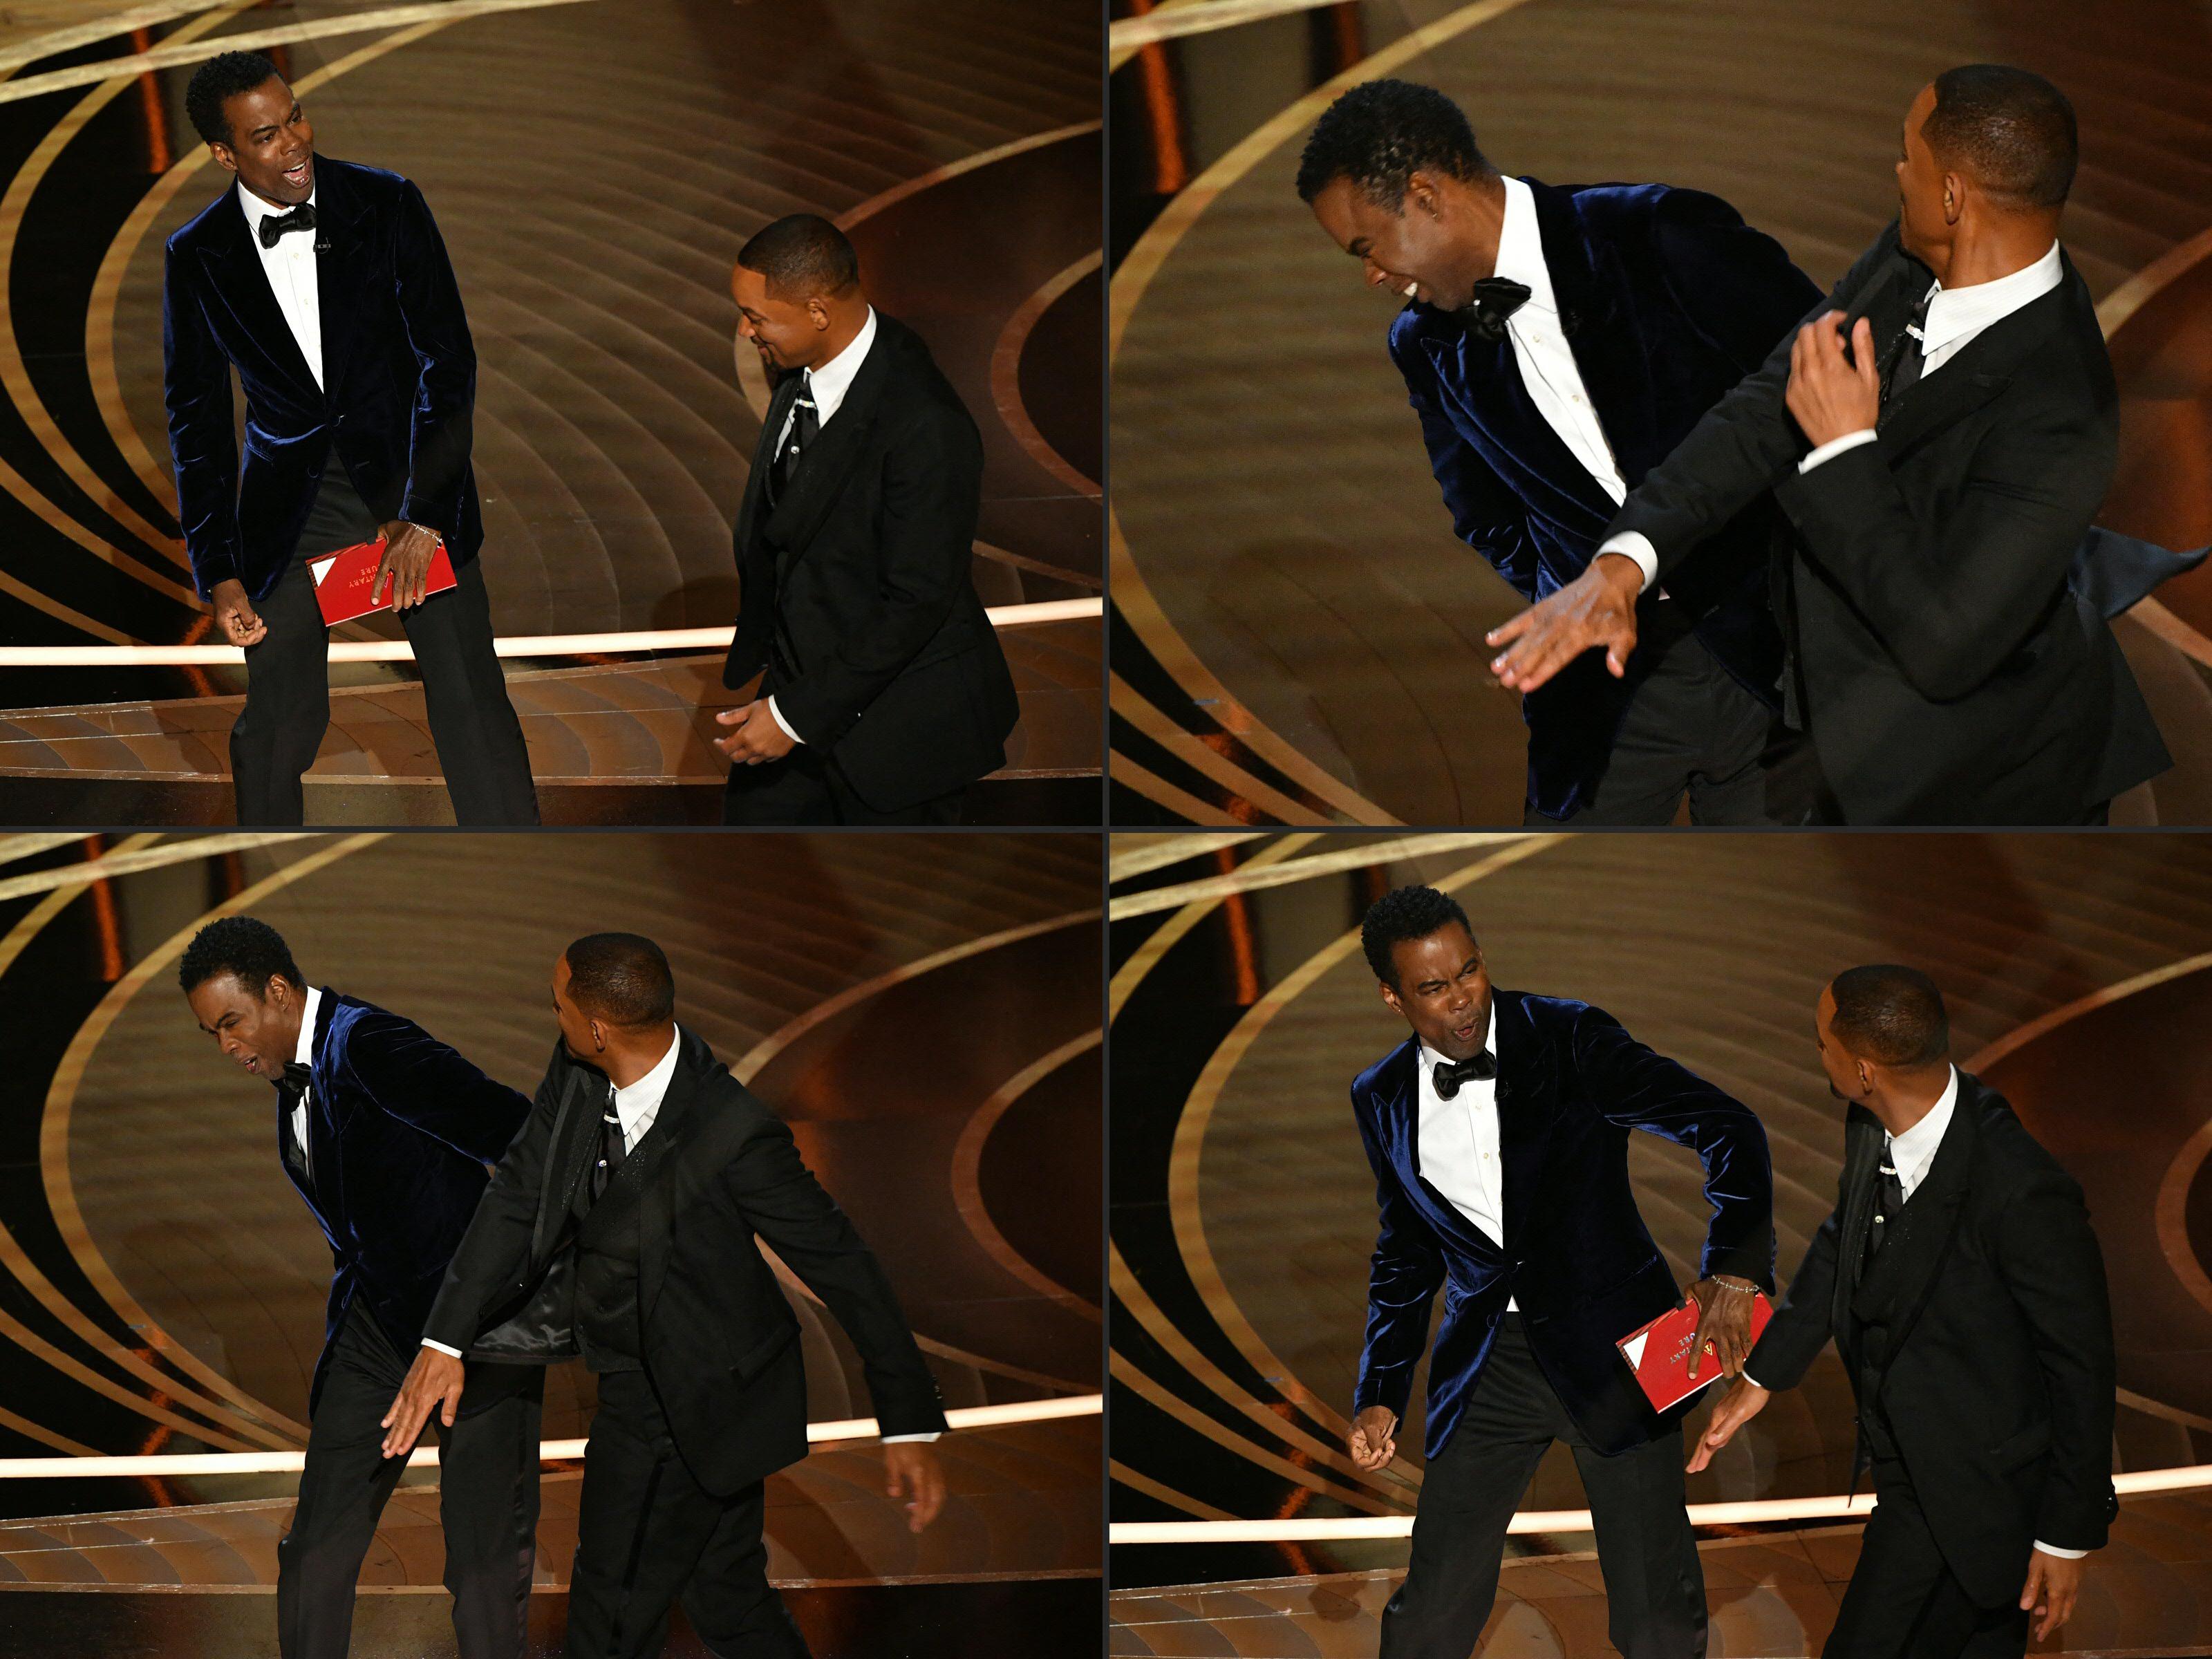 Will Smith Chris Rock Oscars slap Why it was so hard to believe it wasnt staged. photo image